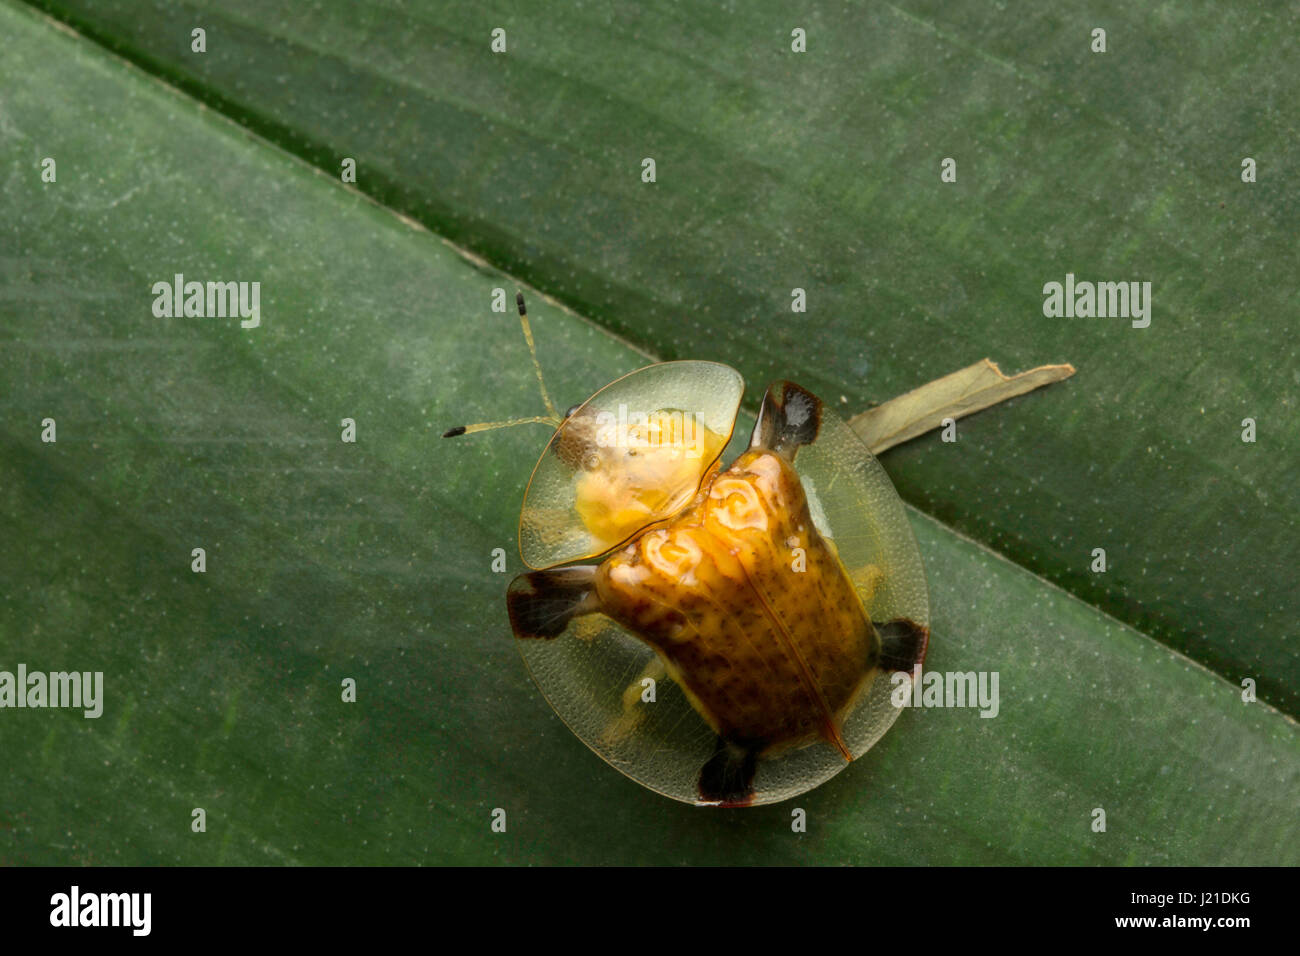 Tortoise-shell beetle, Aarey Milk Colony , INDIA. The golden-tortoise-shell beetle is a leaf beetle belonging to family Chrysomelidae. It is commonly  Stock Photo